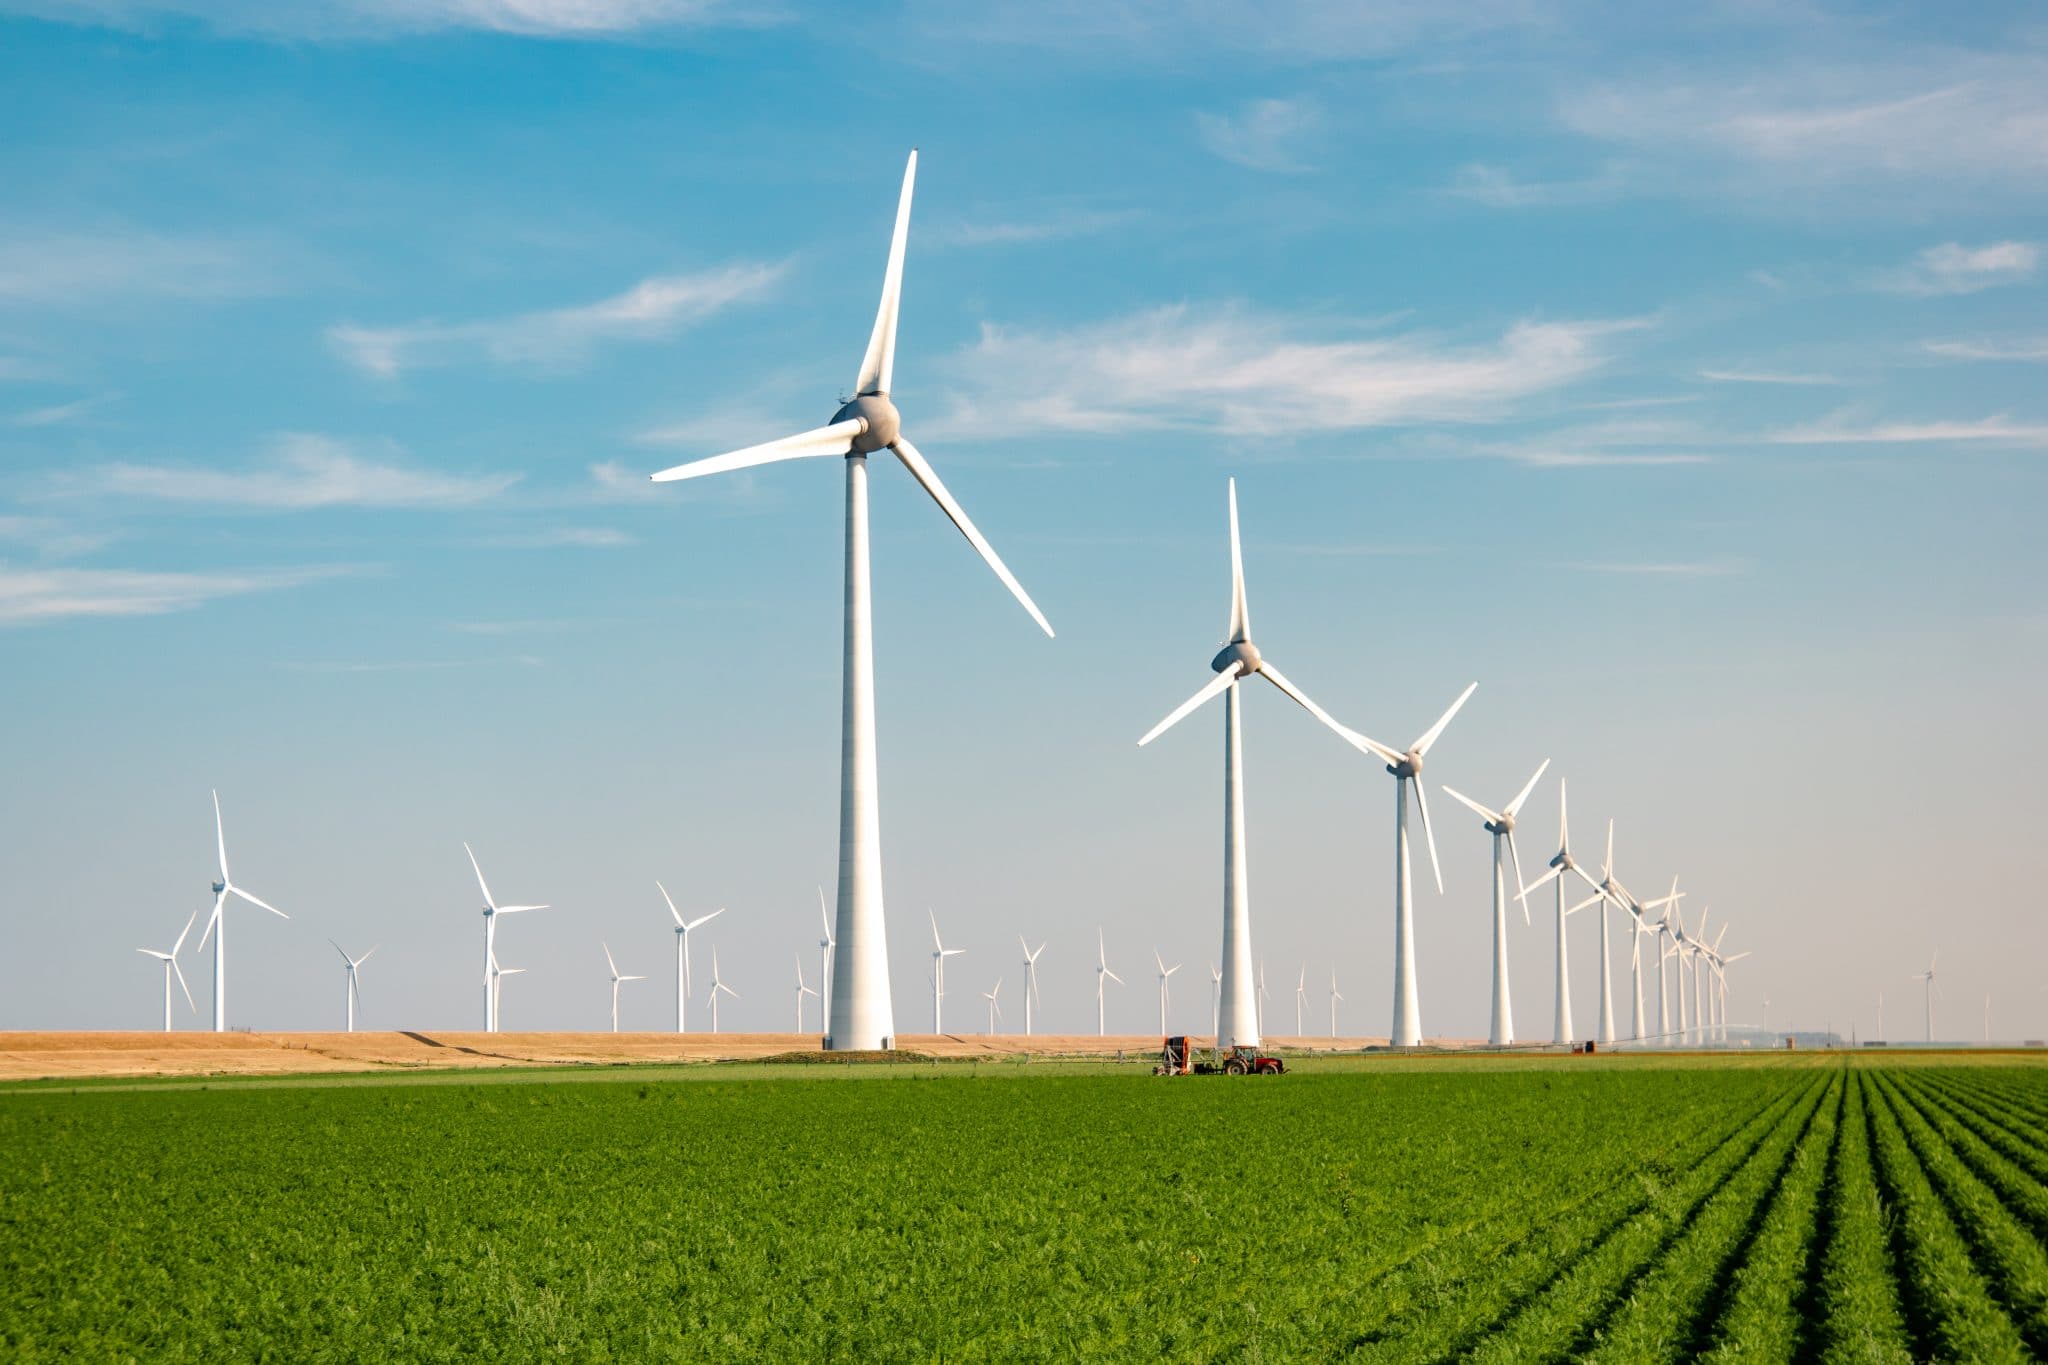 How To Invest In Wind Power Stocks